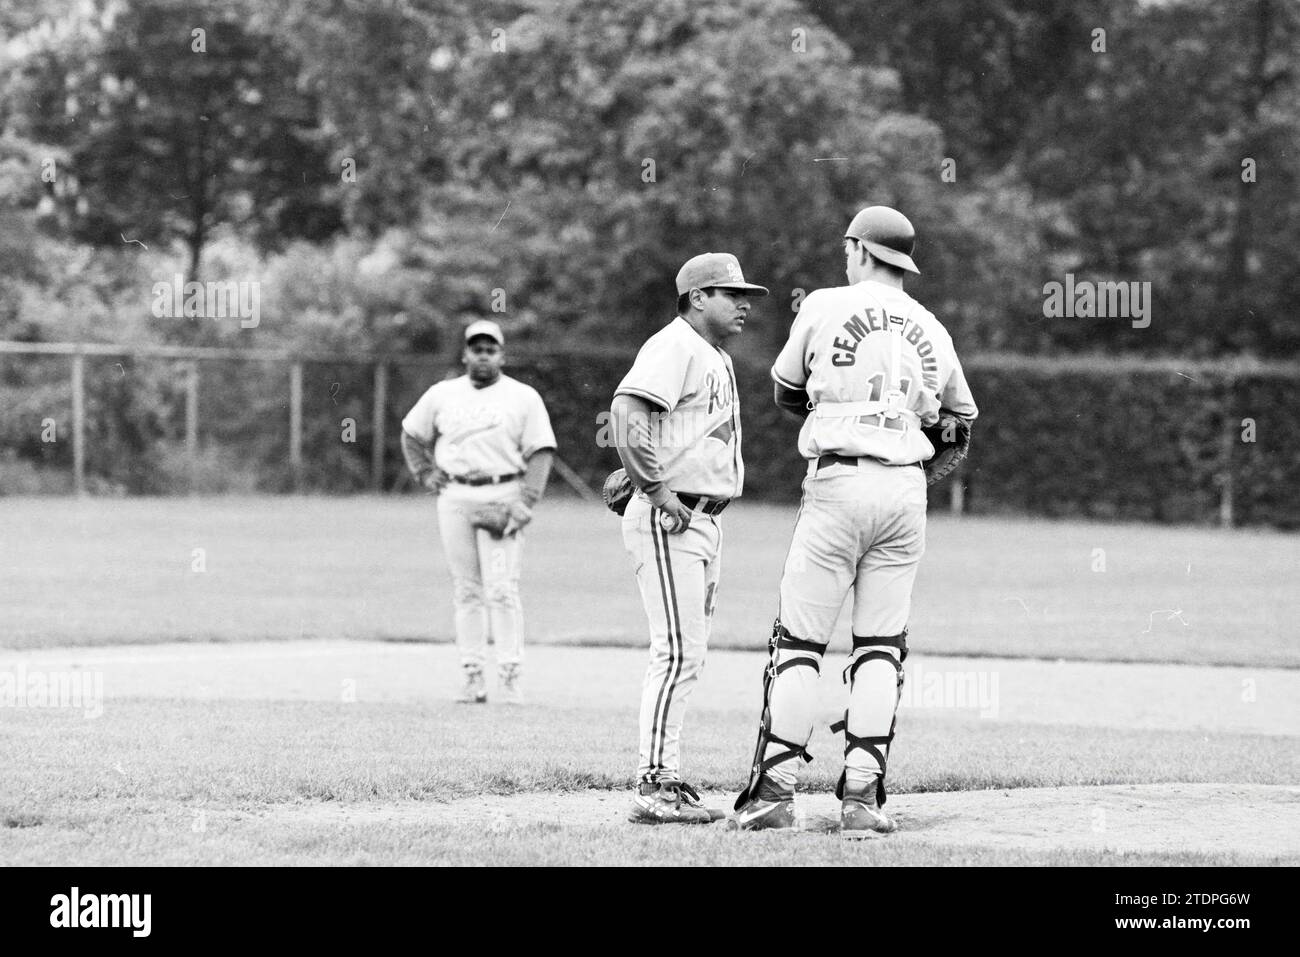 Baseball, Sparks - RCH, 01-05-1993, Whizgle News from the Past, Tailored for the Future. Explore historical narratives, Dutch The Netherlands agency image with a modern perspective, bridging the gap between yesterday's events and tomorrow's insights. A timeless journey shaping the stories that shape our future Stock Photo